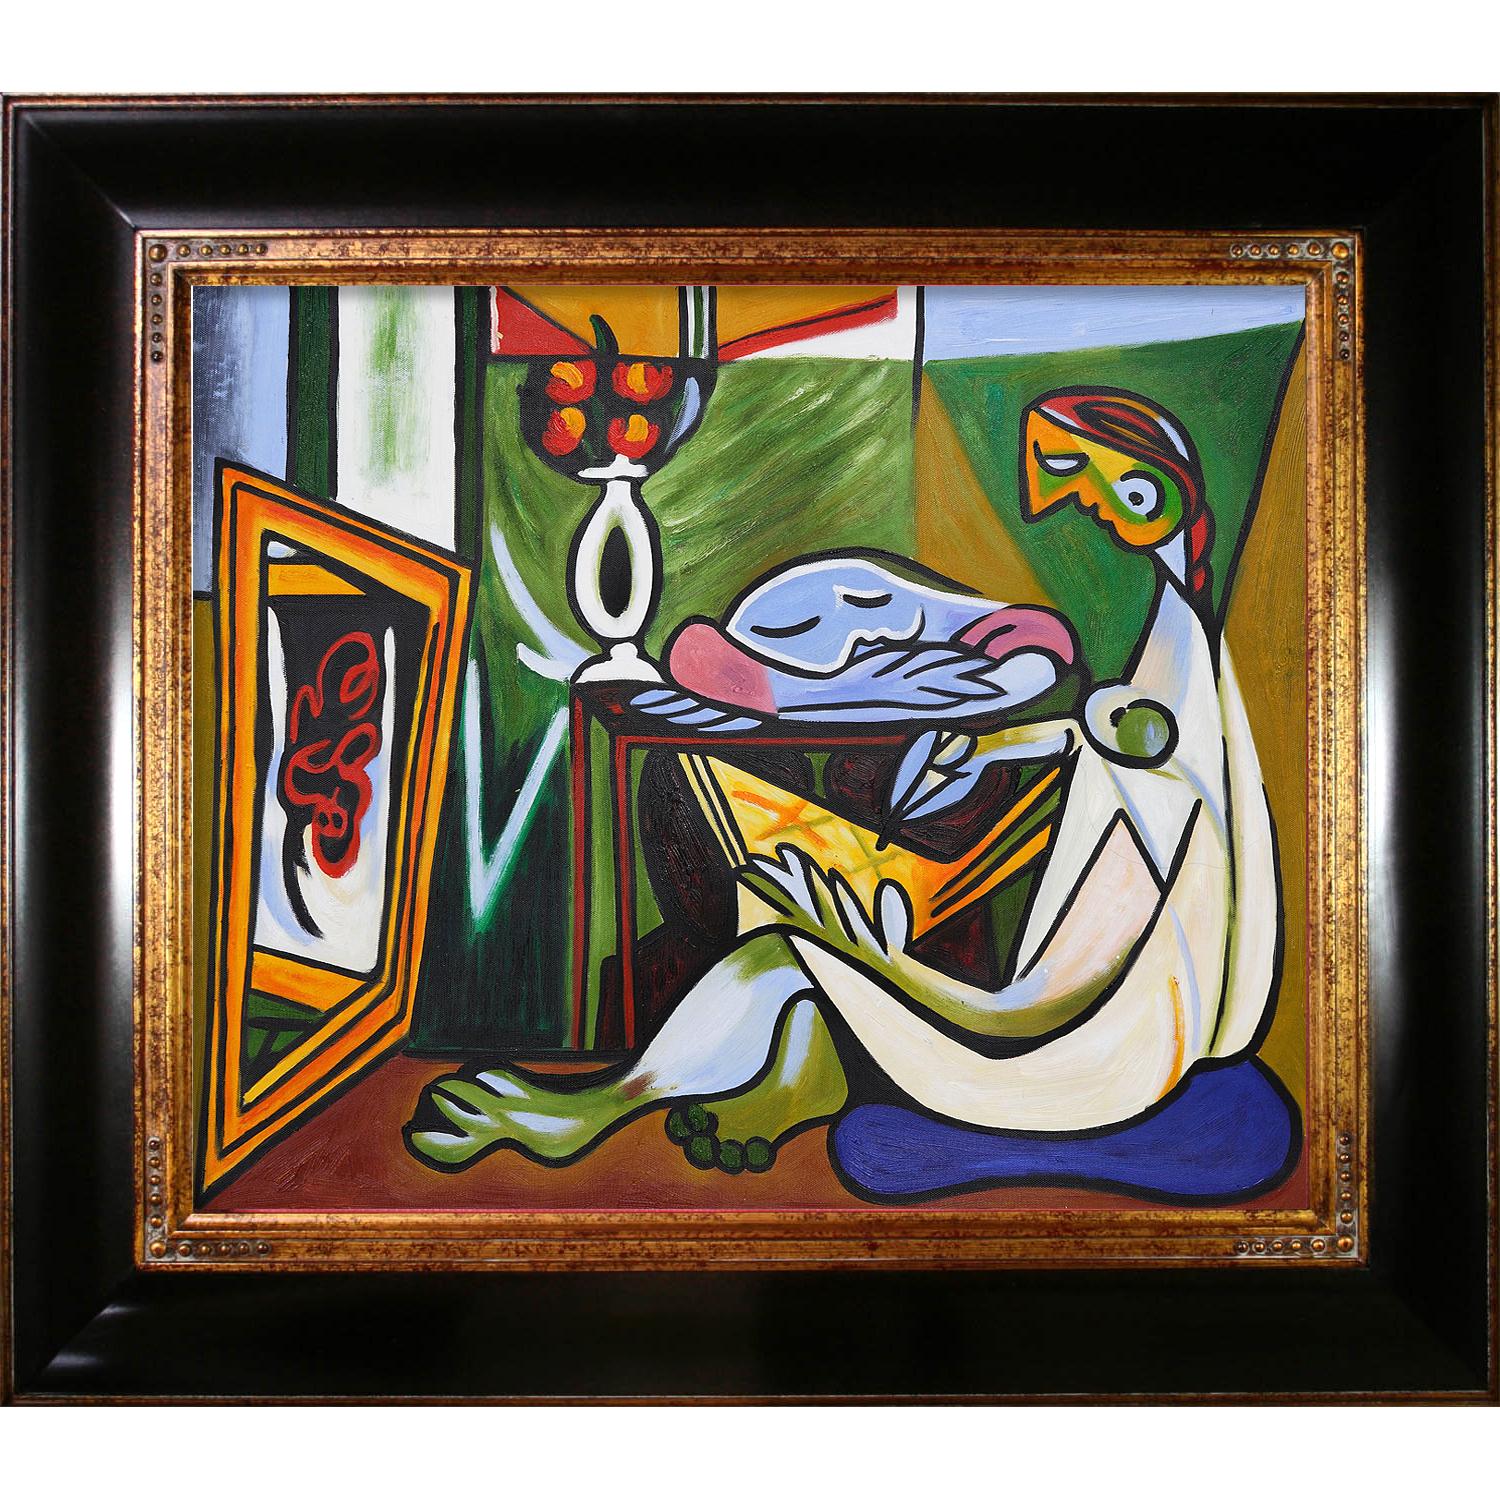 Pablo Picasso  La Muse Photo Reprint On Framed Canvas Wall Art Home Decoration 